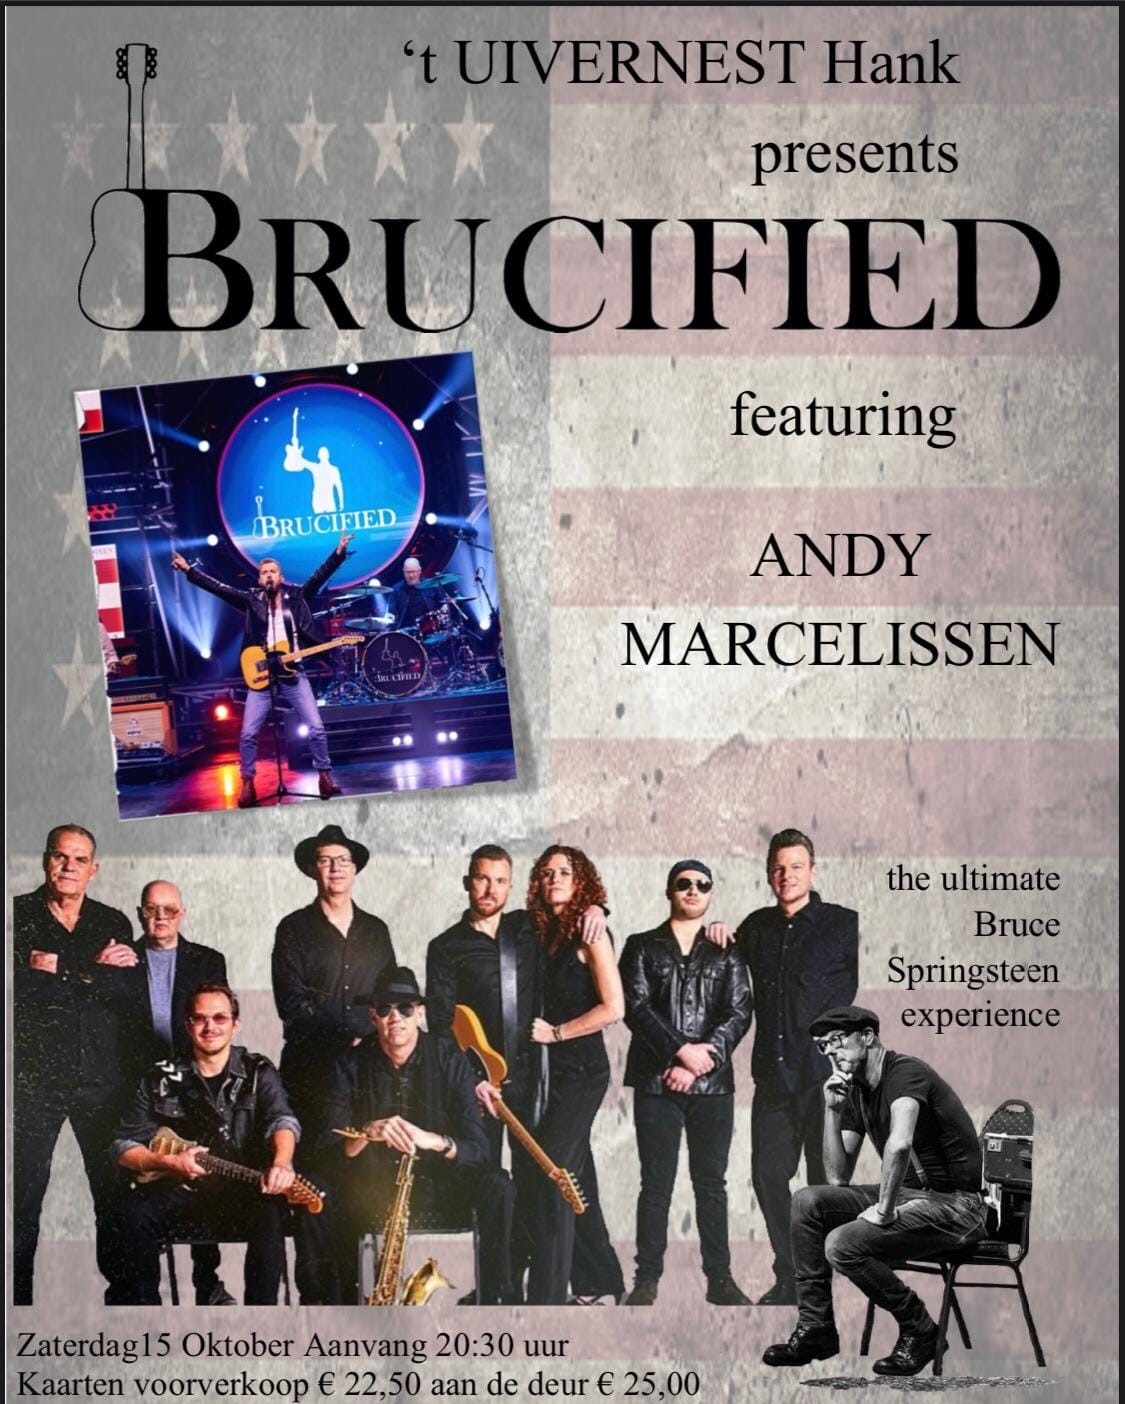 Brucified featuring Andy Marcelissen